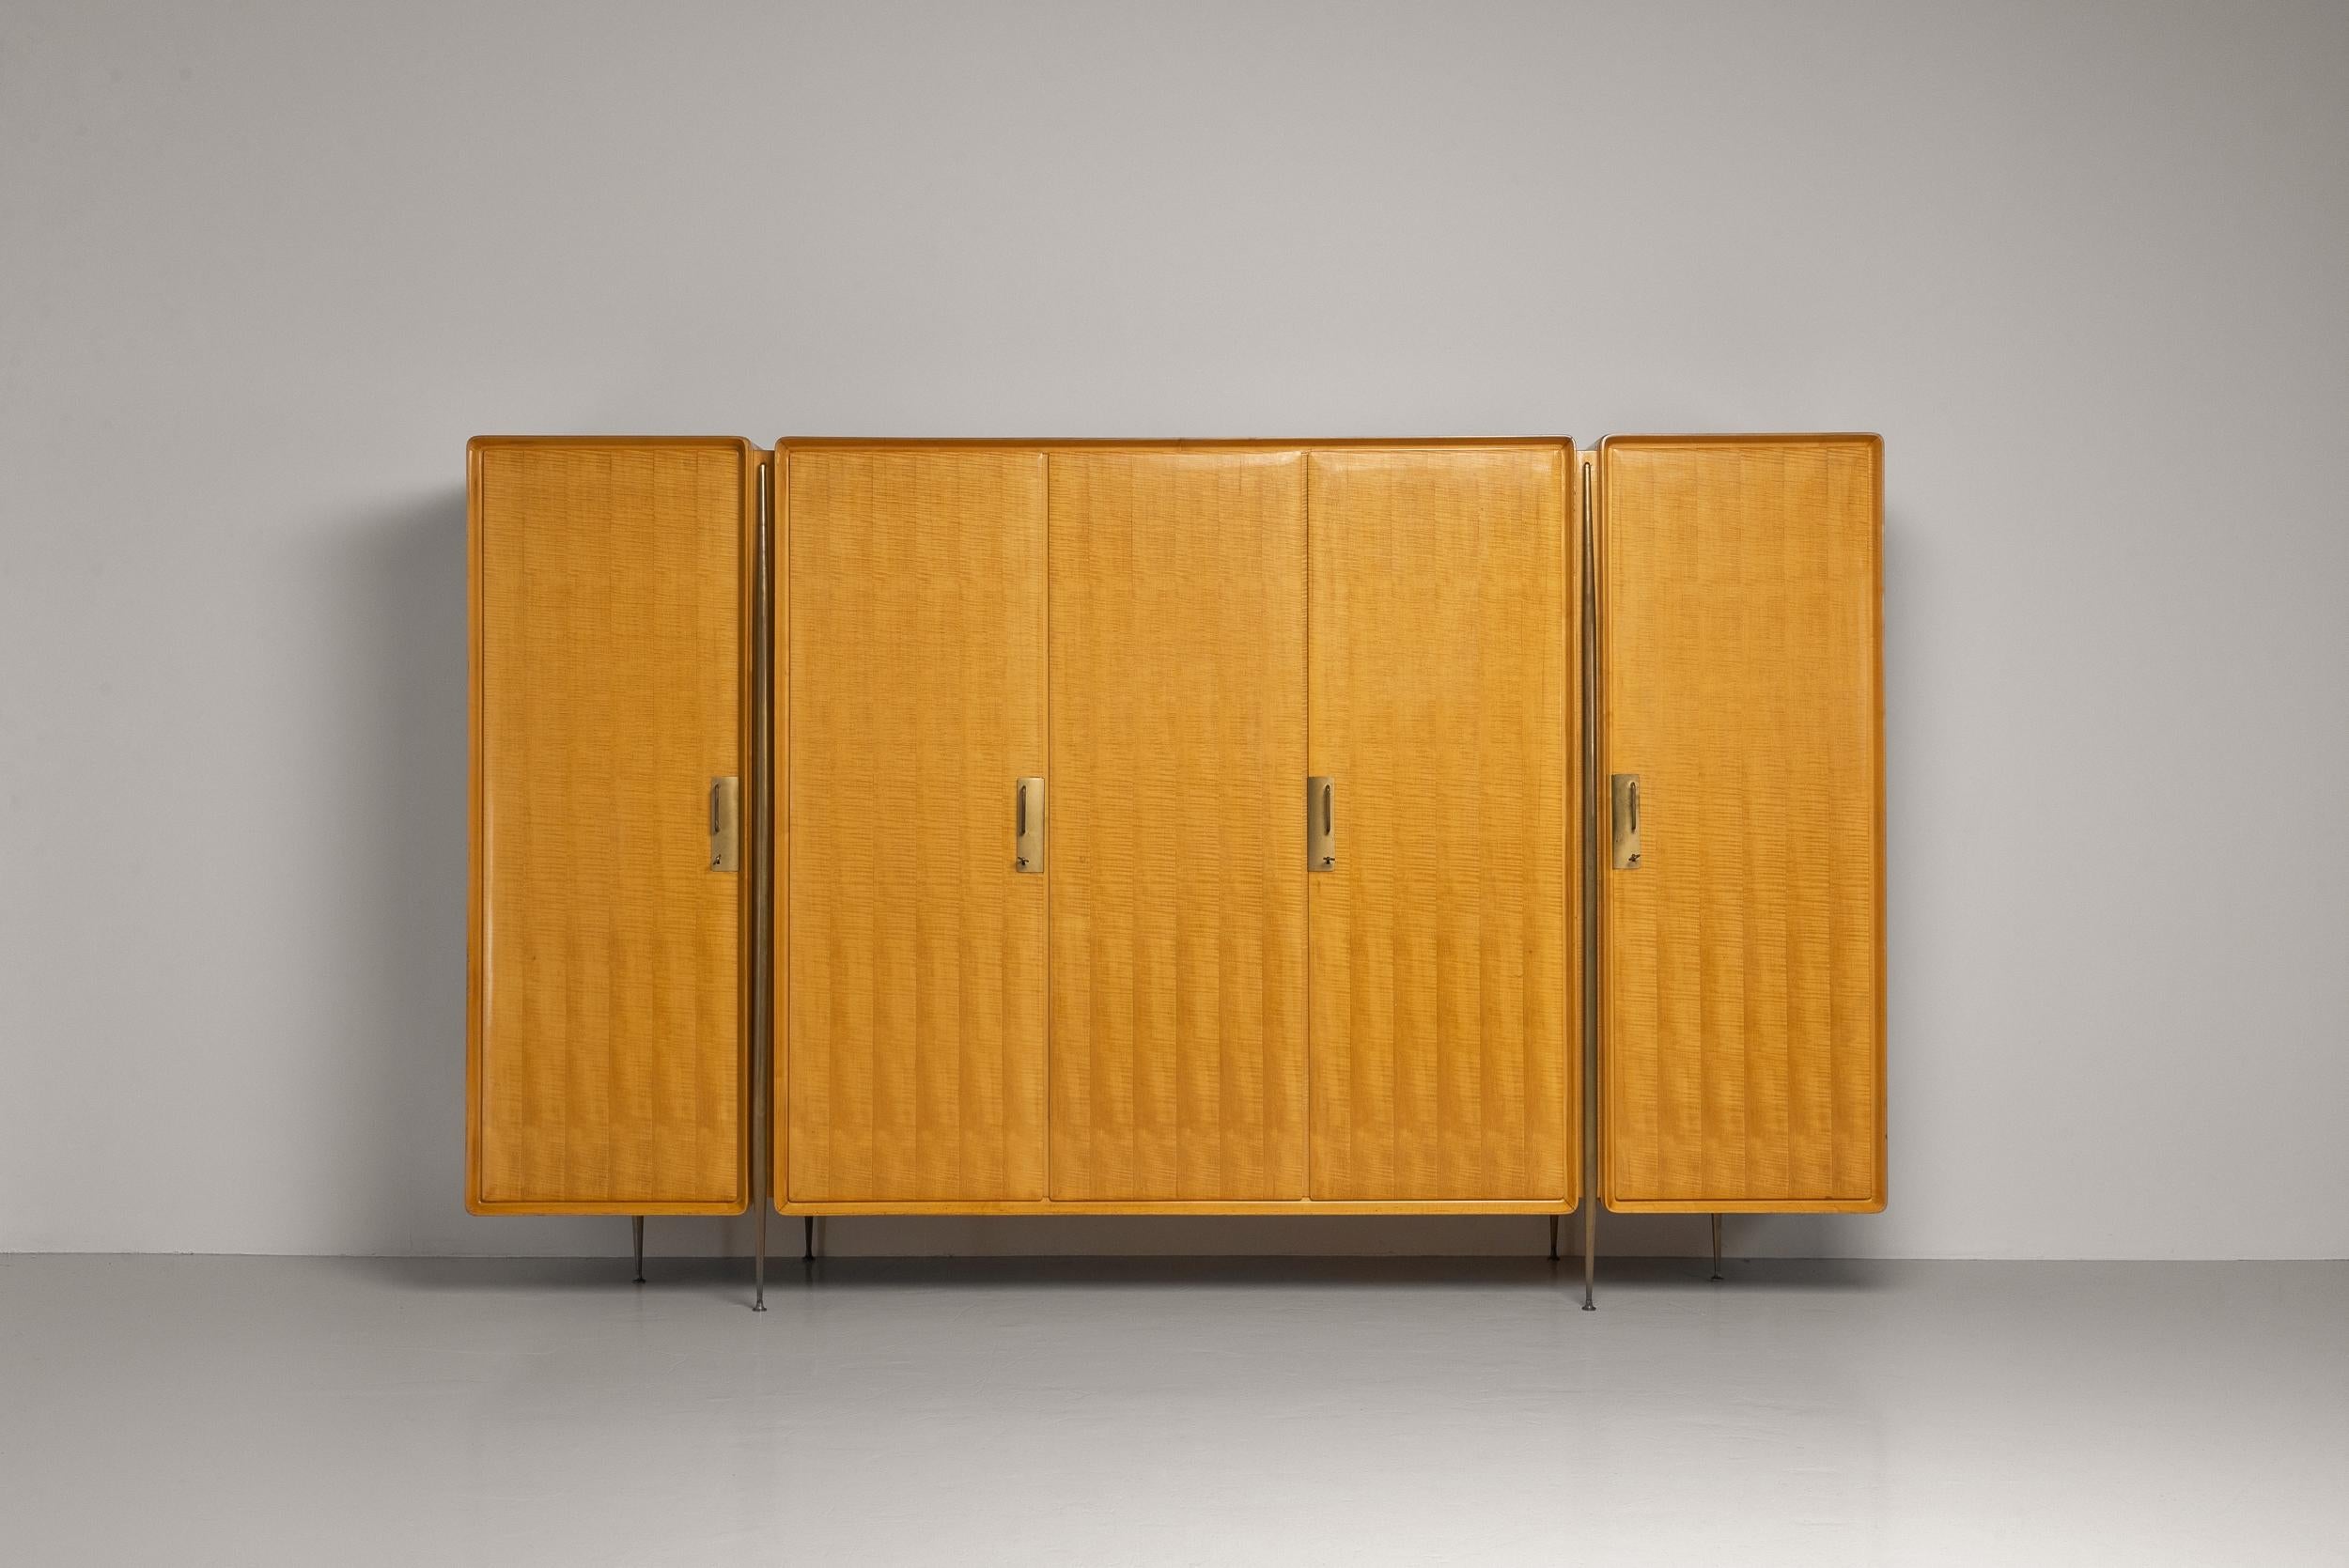 Exceptional wardrobe created by the renowned furniture designer Silvio Cavatorta in Italy 1958. This cabinet is made from beautiful maple wood with a glossy finish that gives it a polished and sophisticated appearance. The wood's natural tones